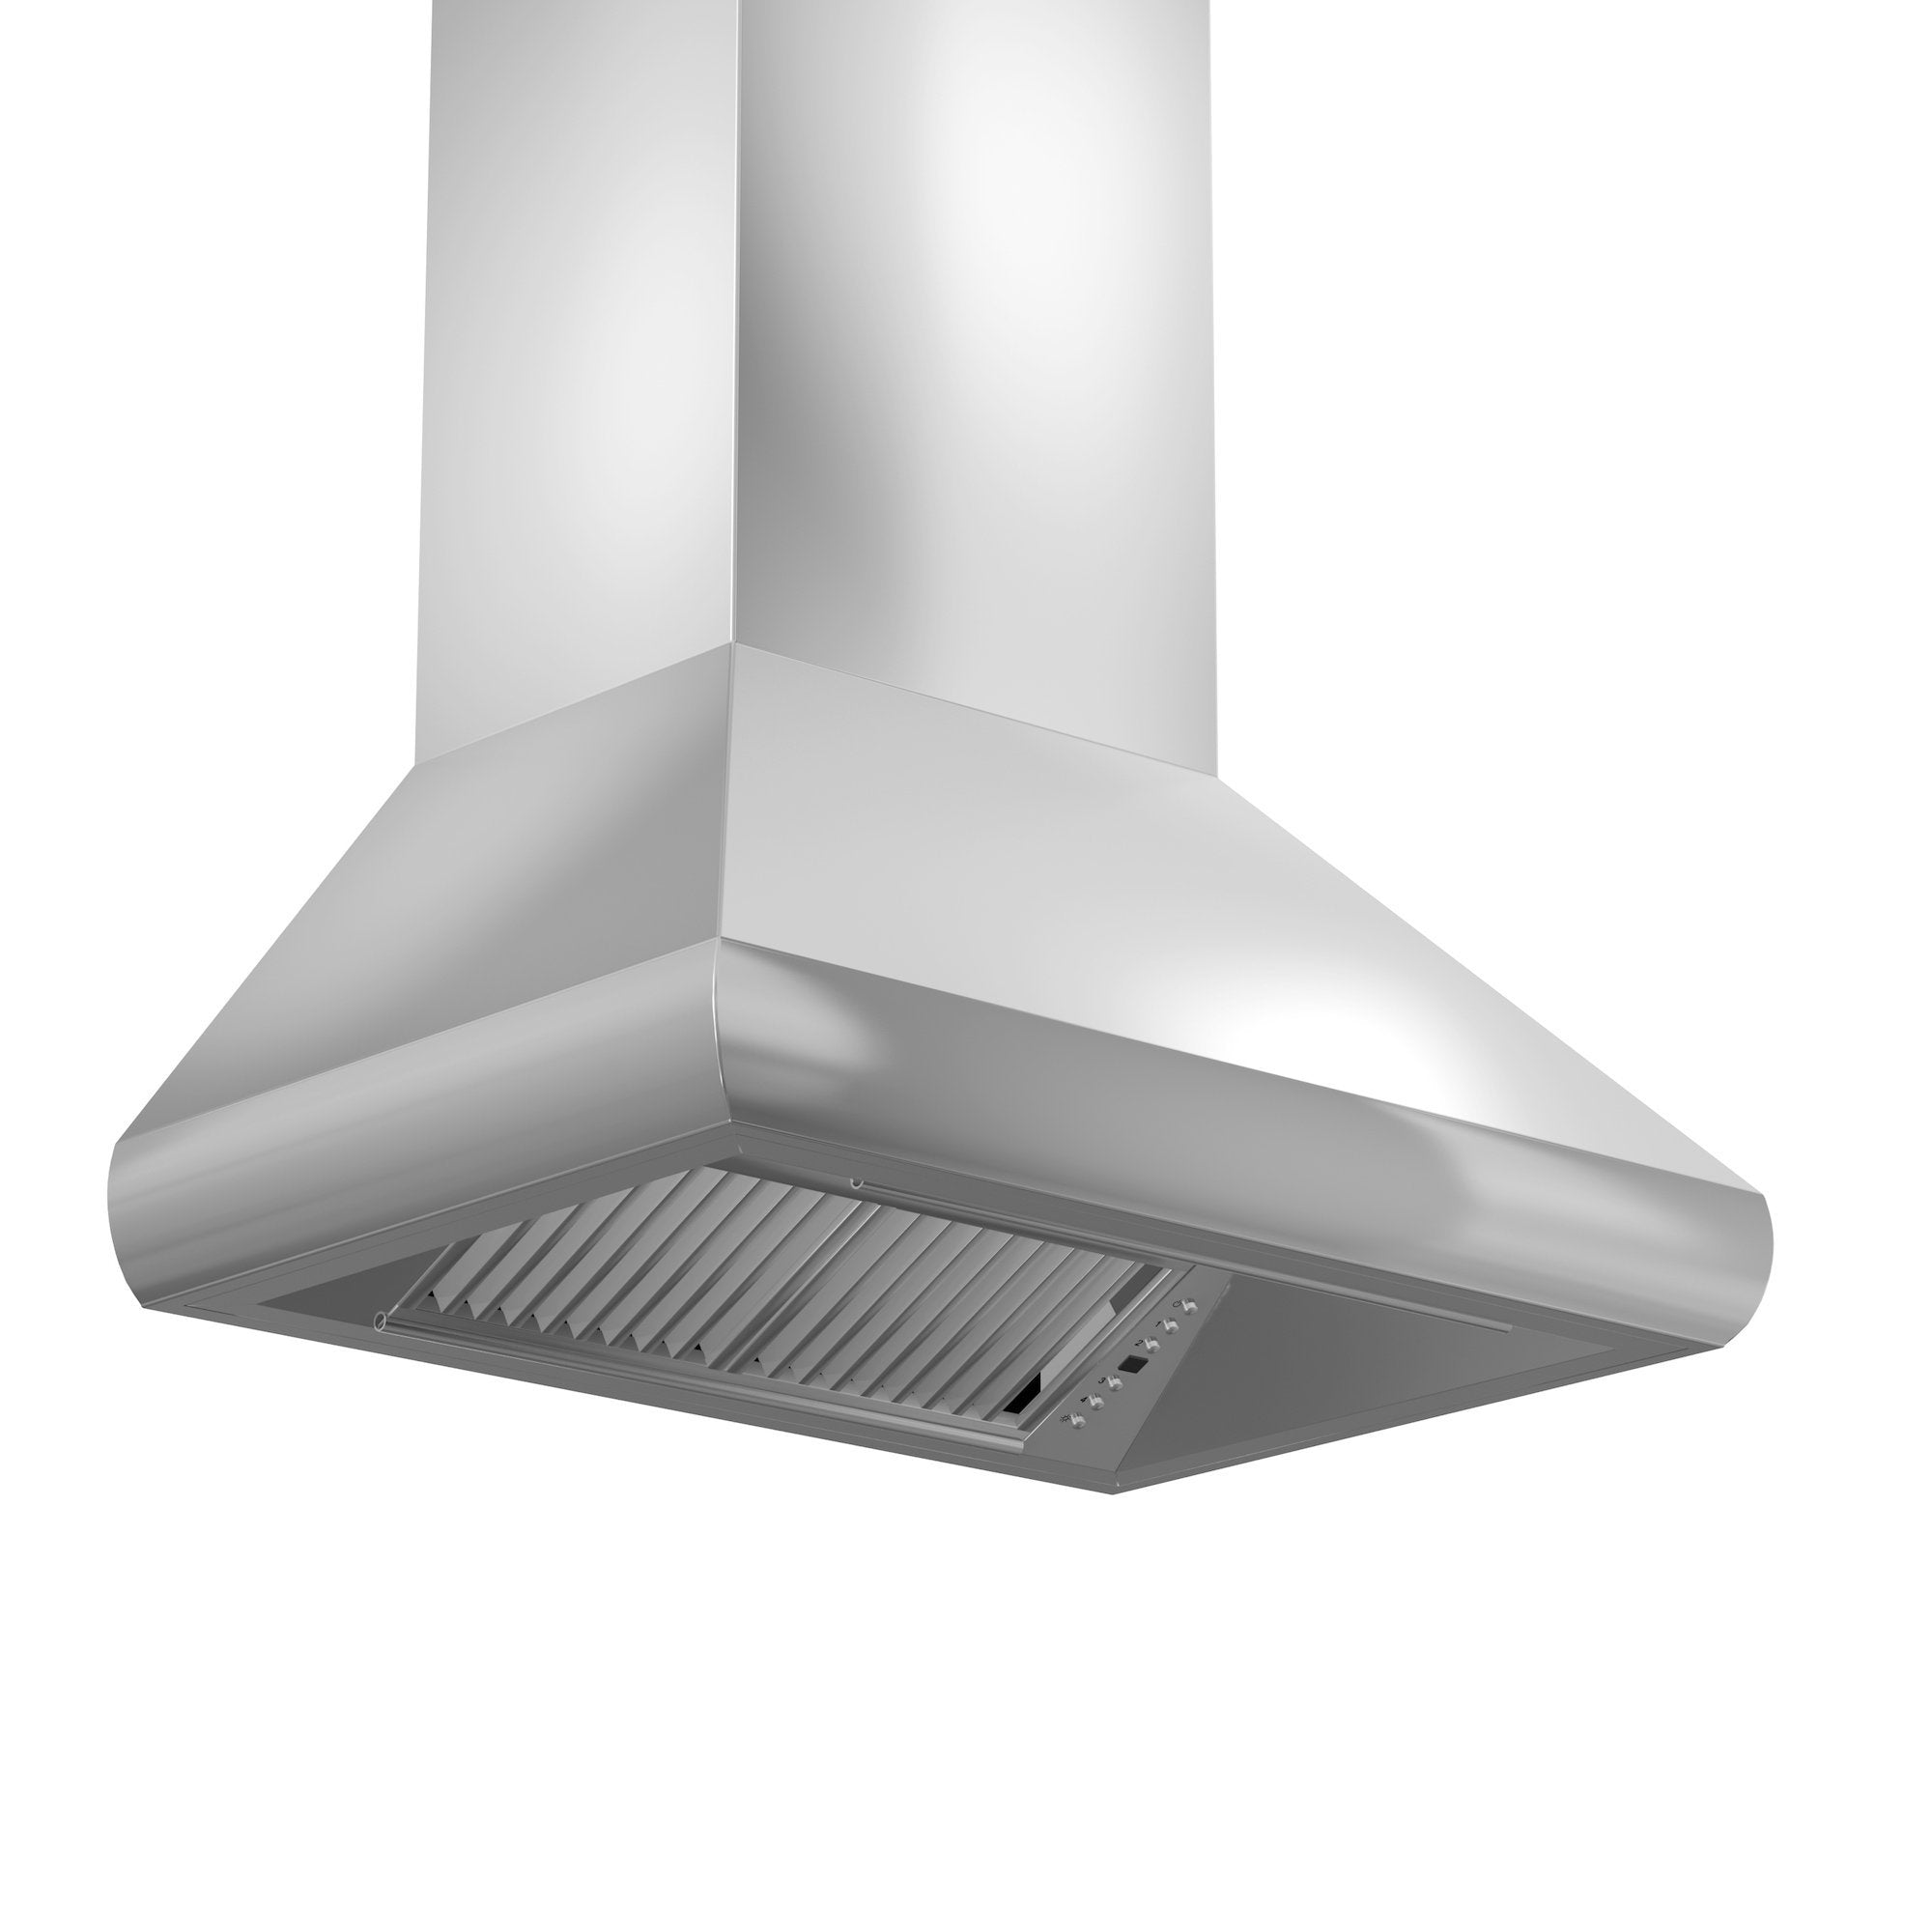 ZLINE Kitchen and Bath, ZLINE Wall Mount Range Hood In Stainless Steel - Includes Remote Blower (587), 587-RS-30-400,